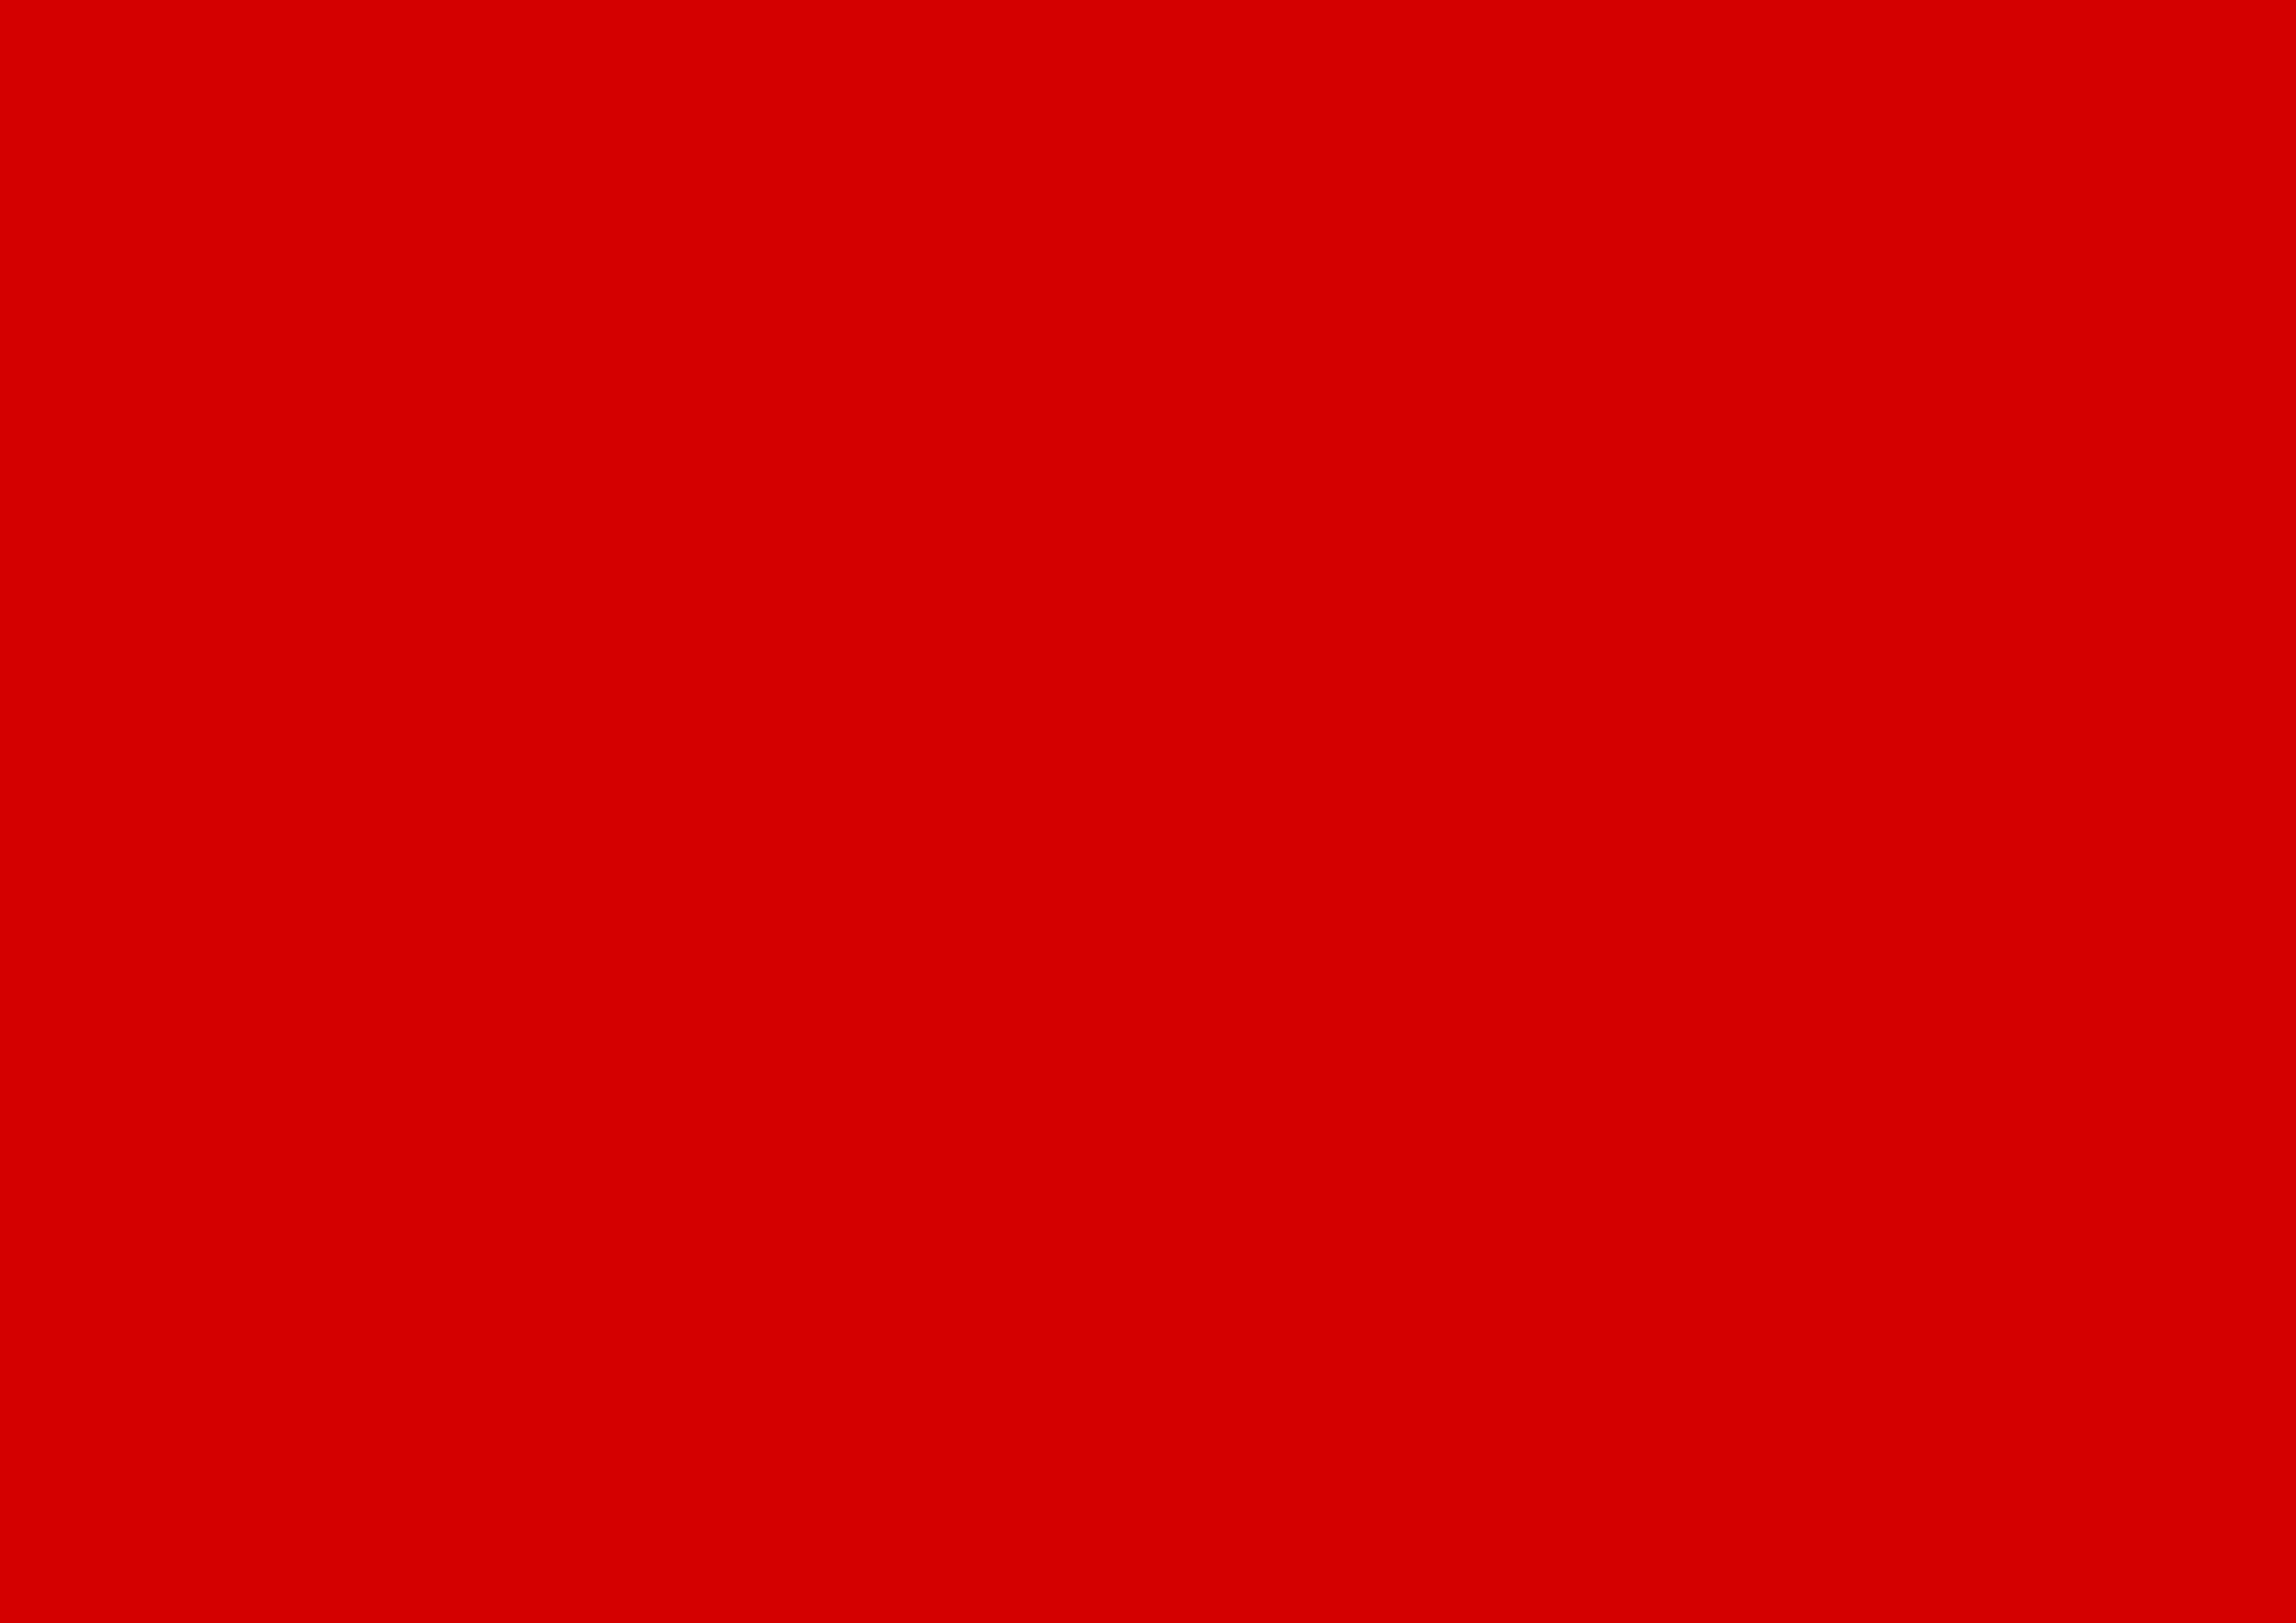 3508x2480 Rosso Corsa Solid Color Background